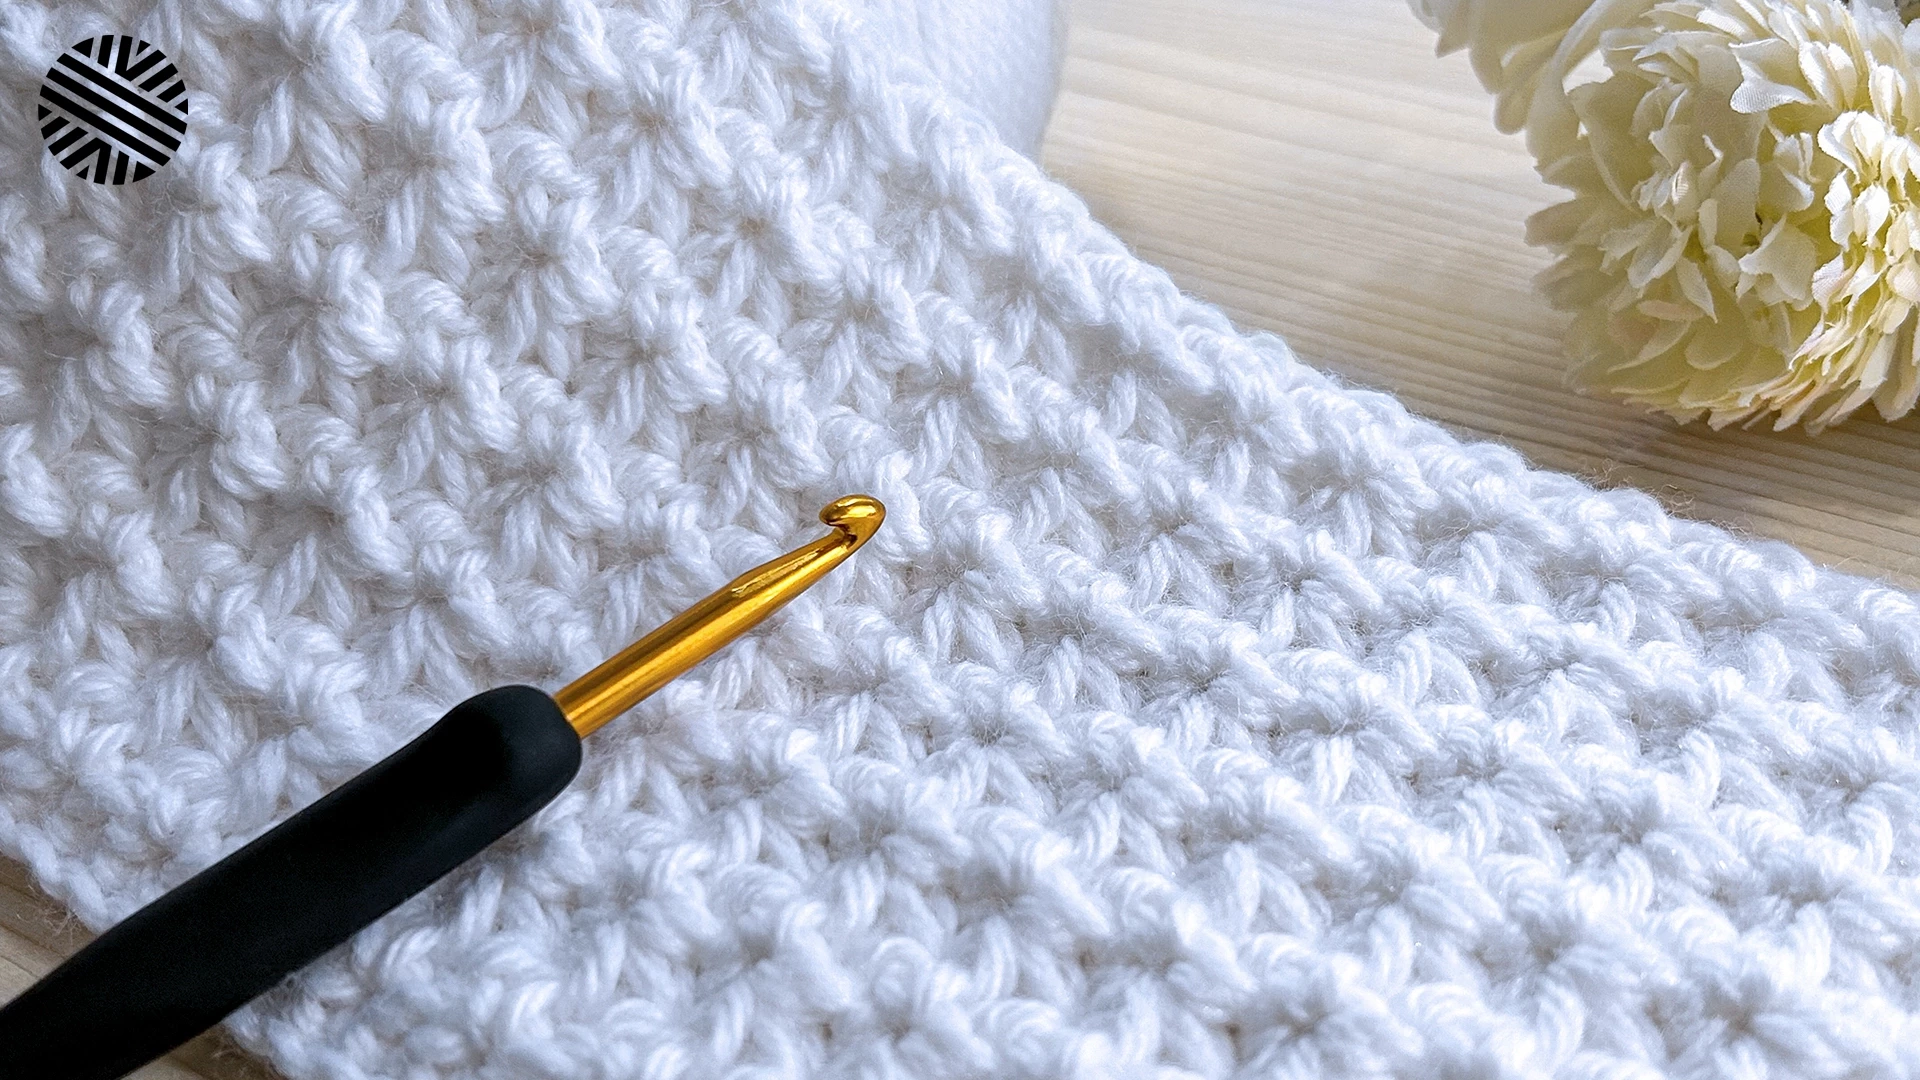 How to Crochet a Picot Stitch - dummies